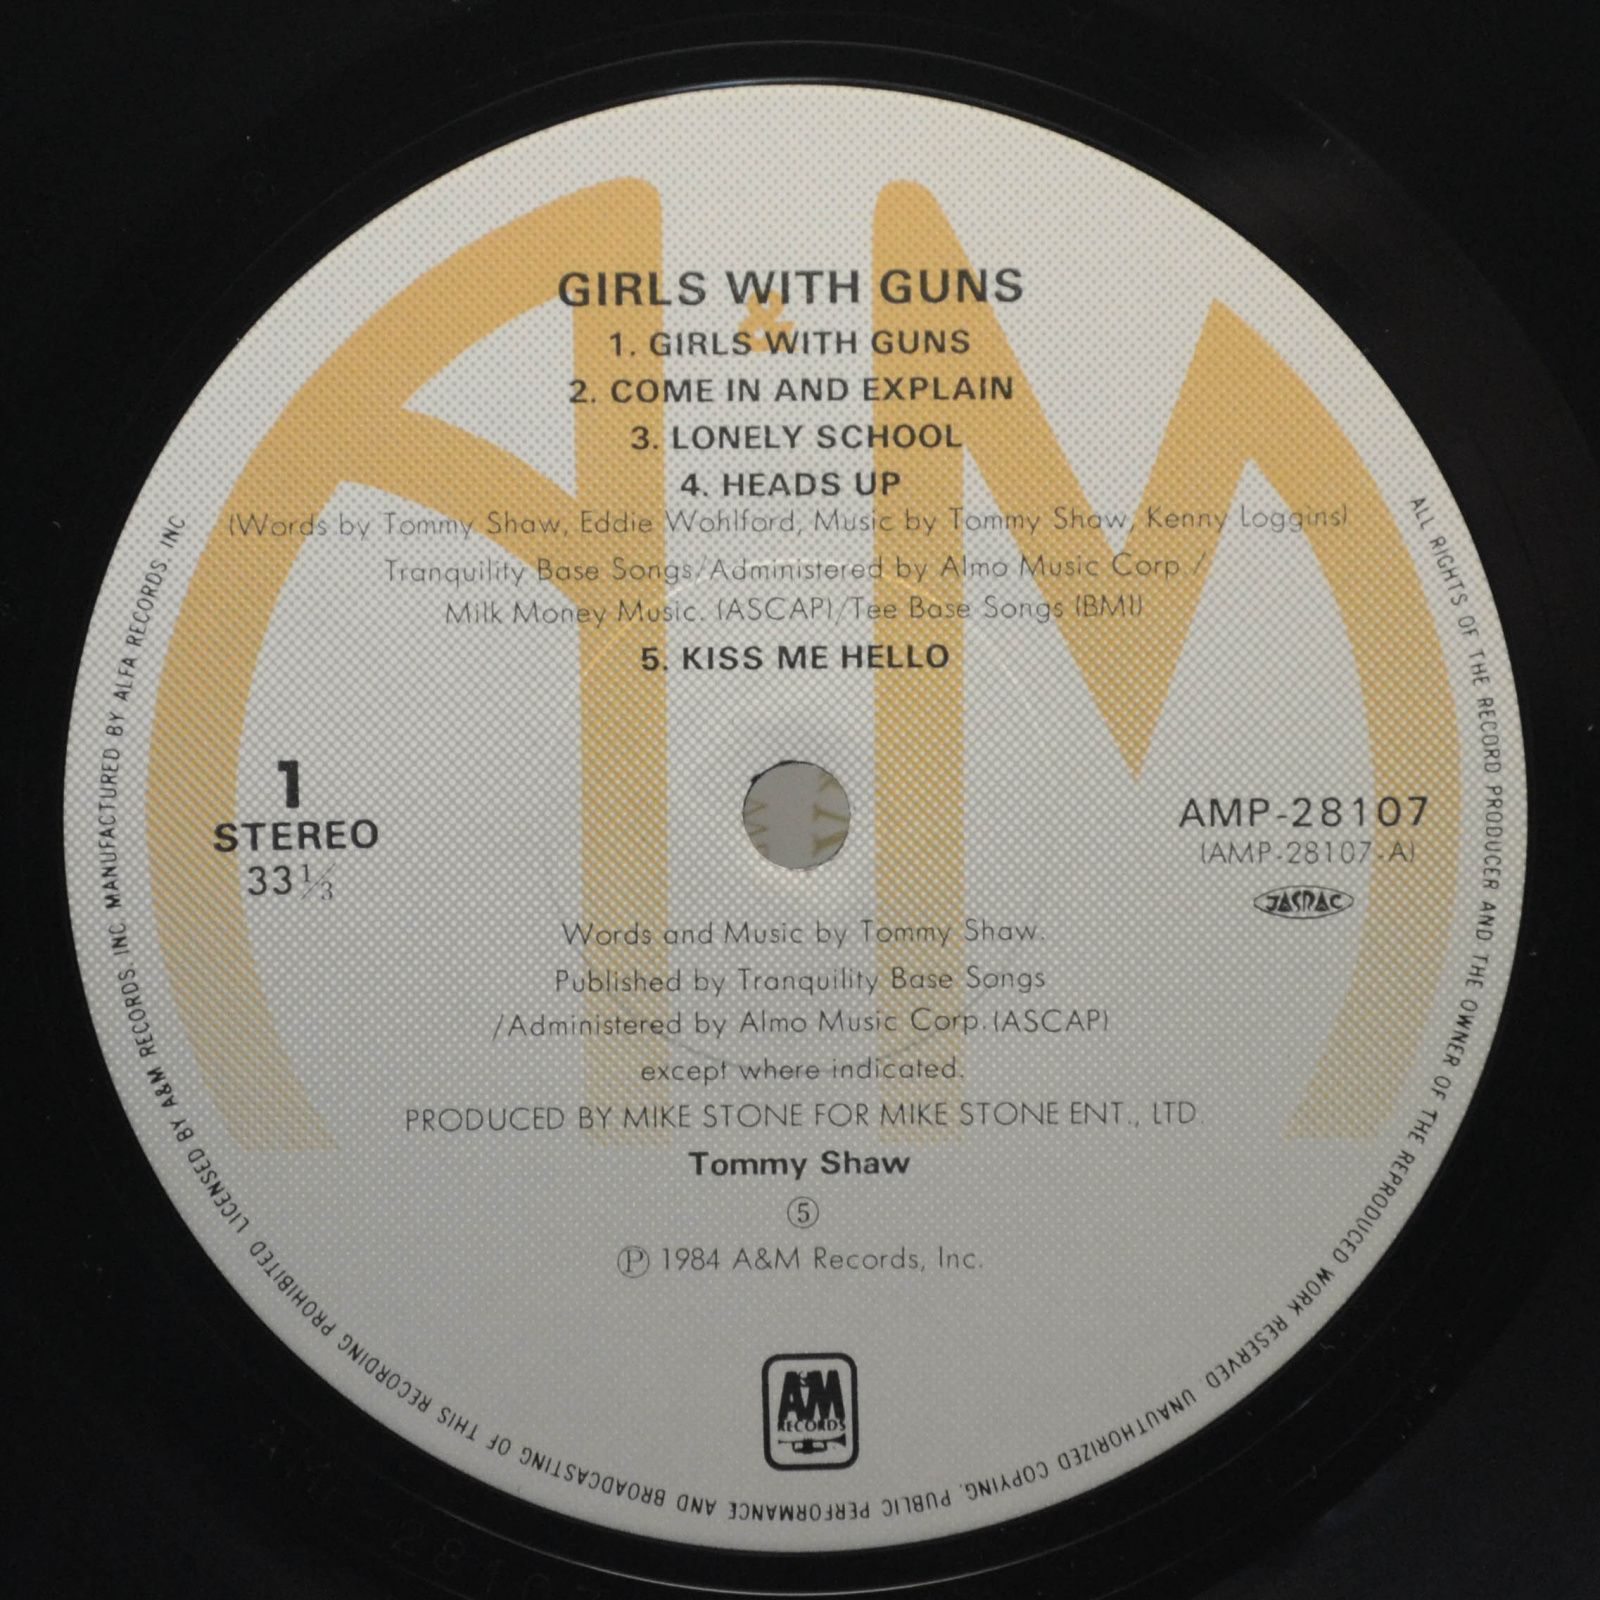 Tommy Shaw — Girls With Guns, 1984